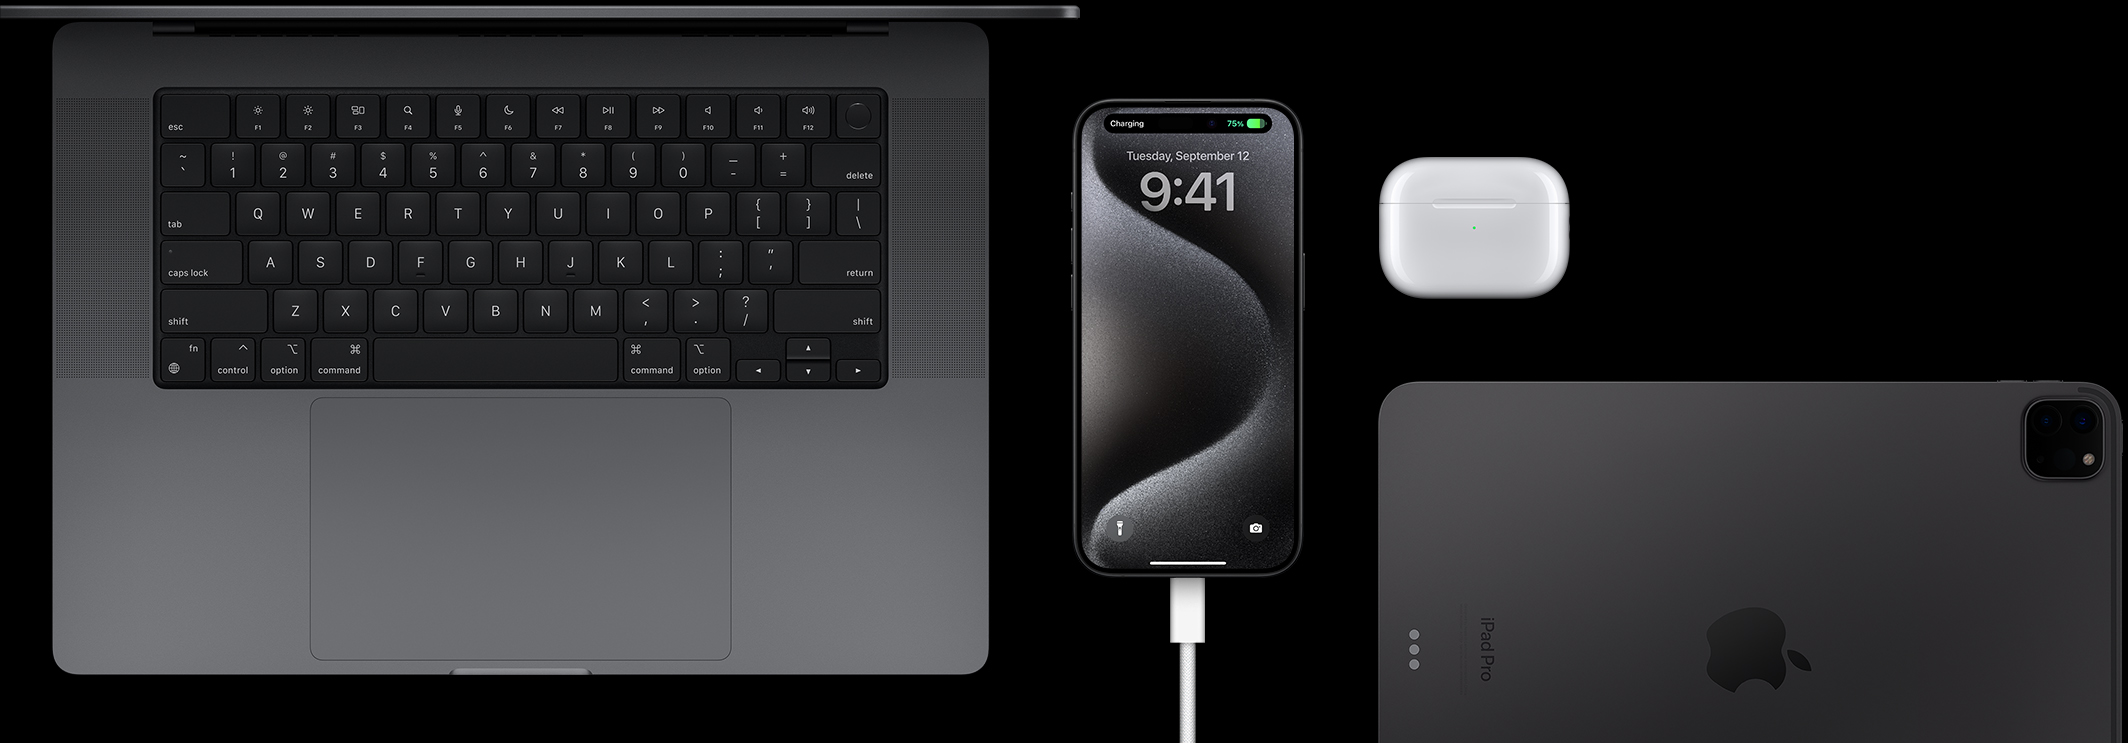 iPhone 15 Pro with a USB-C cord plugged into it surrounded by a Macbook Pro, an AirPods Pro and an iPad